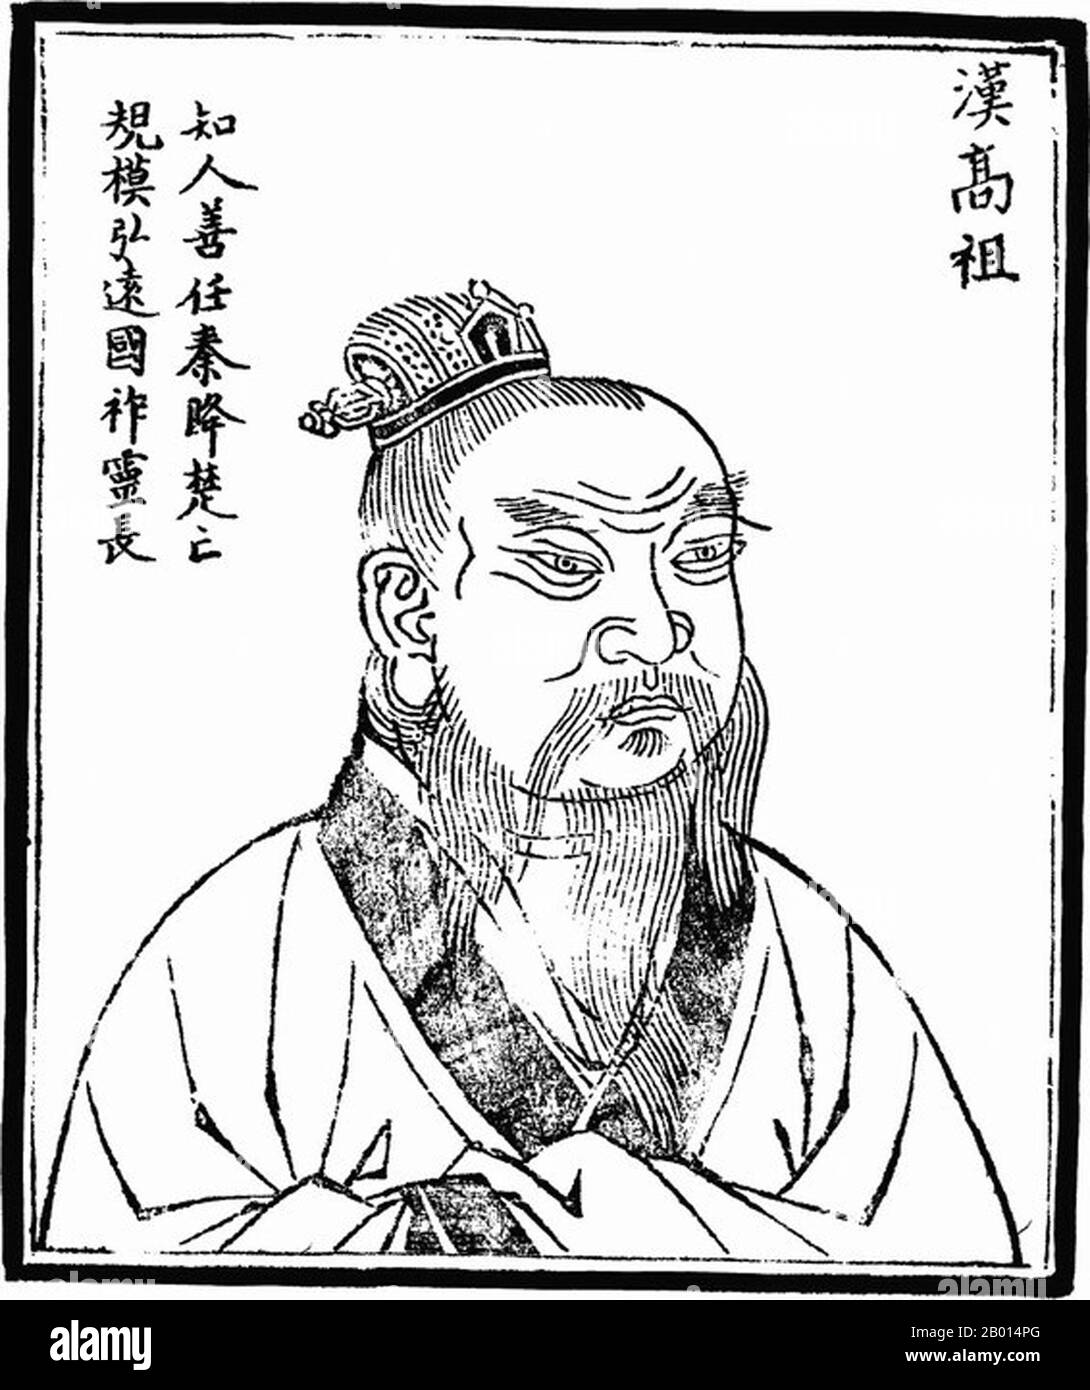 China: Emperor Gaozu  (256 BCE – 1 June 195 BCE), founder and first ruler of the Western Han Dynasty (r. 206-195 BCE). Illustration, c. 1498.  Emperor Gaozu (Wade-Giles: Kao Tsu), temple name Taizu and personal name Liu Bang, was the first emperor of the Han Dynasty. Liu was one of the few dynastic founders in Chinese history who emerged from the peasant class (another major example being Zhu Yuanzhang of the Ming Dynasty).  In the early stage of his rise to prominence, Liu was addressed as 'Duke of Pei', referring to his hometown of Pei County. He was also granted the title of 'King of Han'. Stock Photo